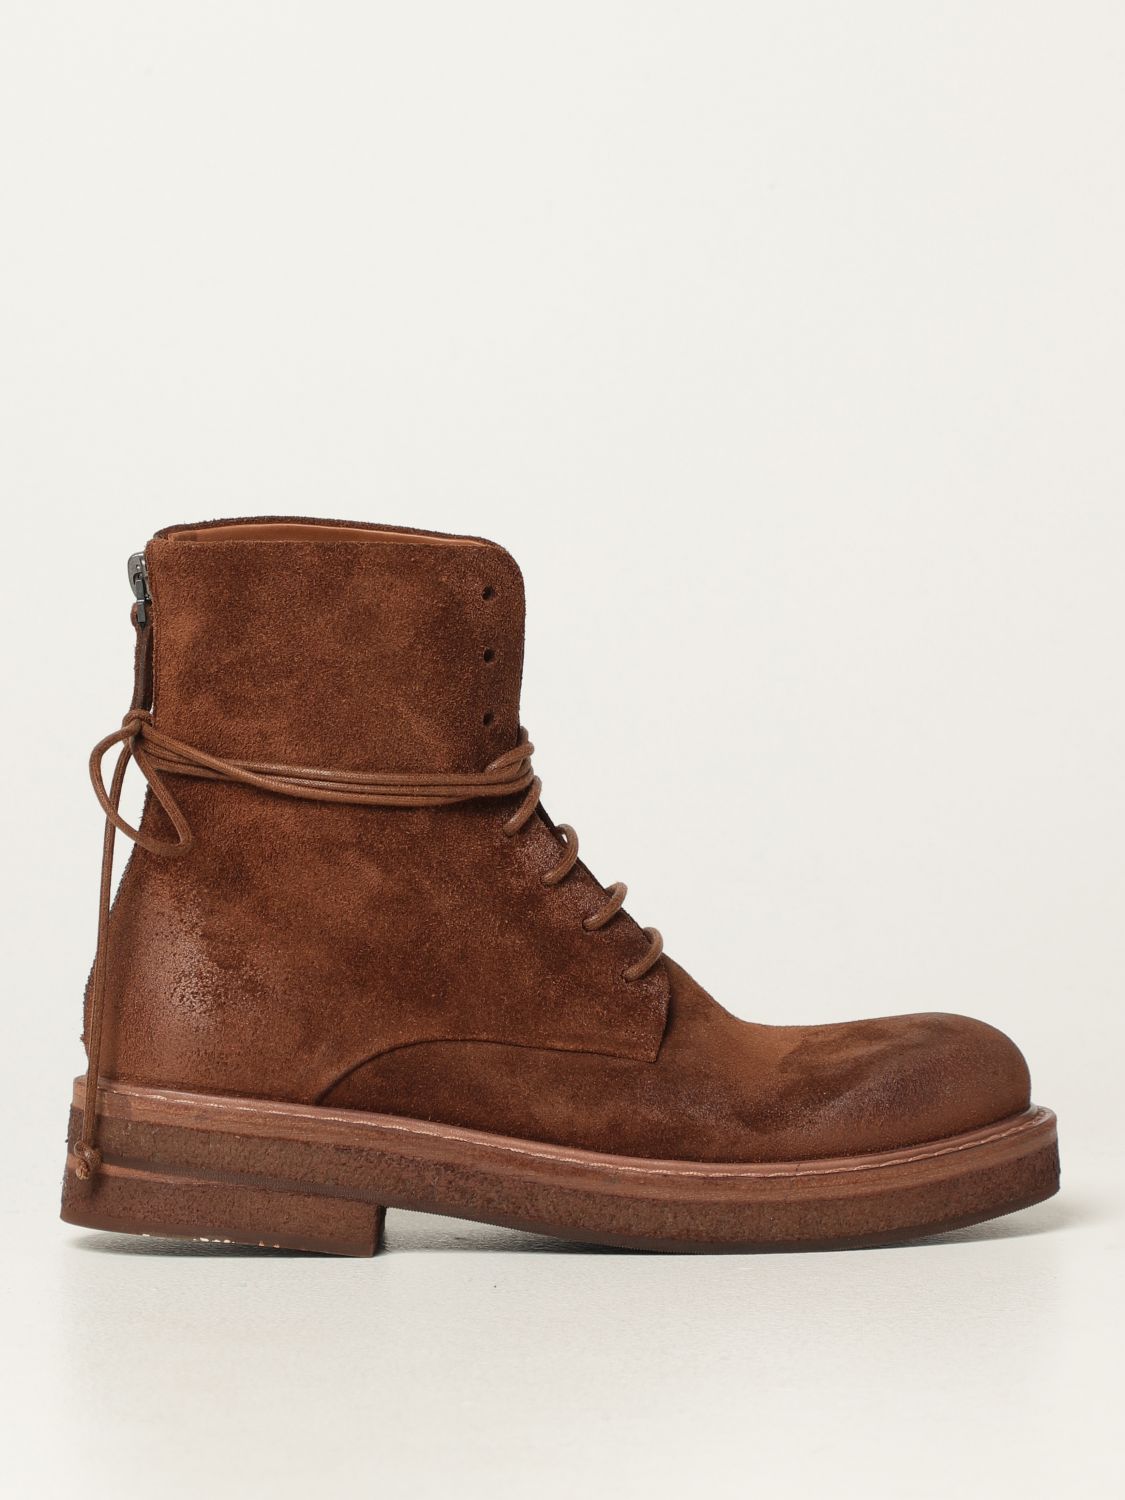 MARSÈLL: Parrucca ankle boots in nubuck leather - Brown | Marsèll flat ...